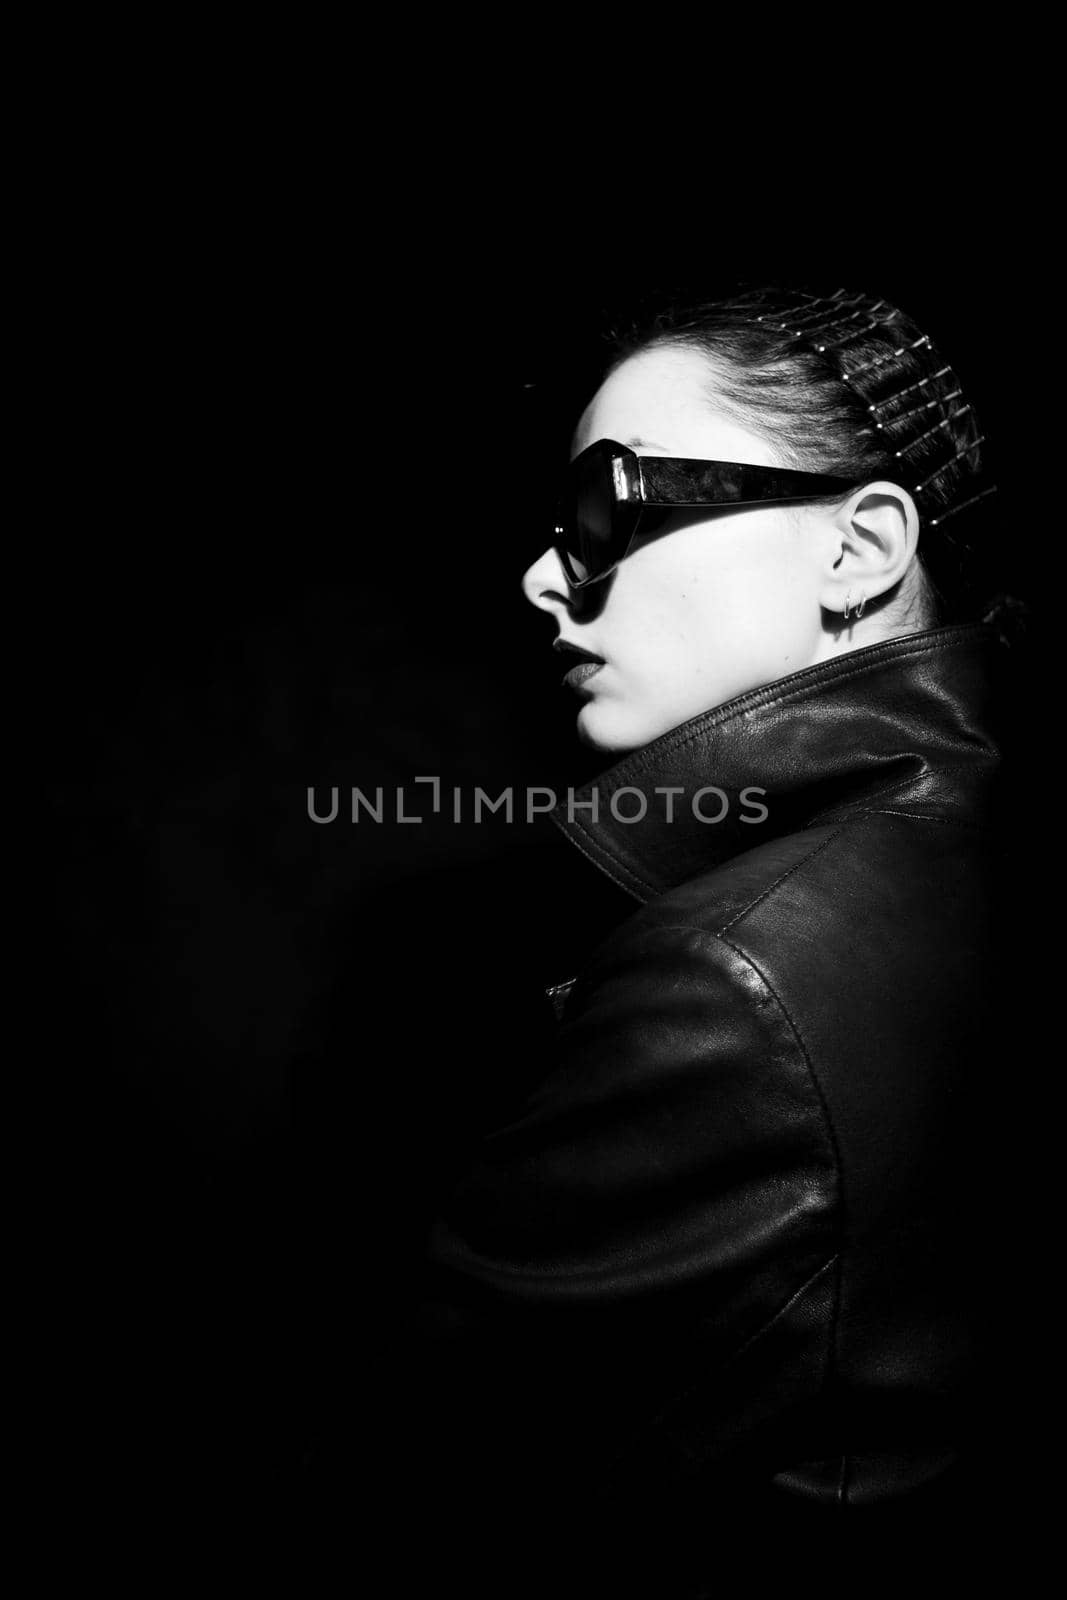 woman in leather coat and sunglasses, black background. High quality photo